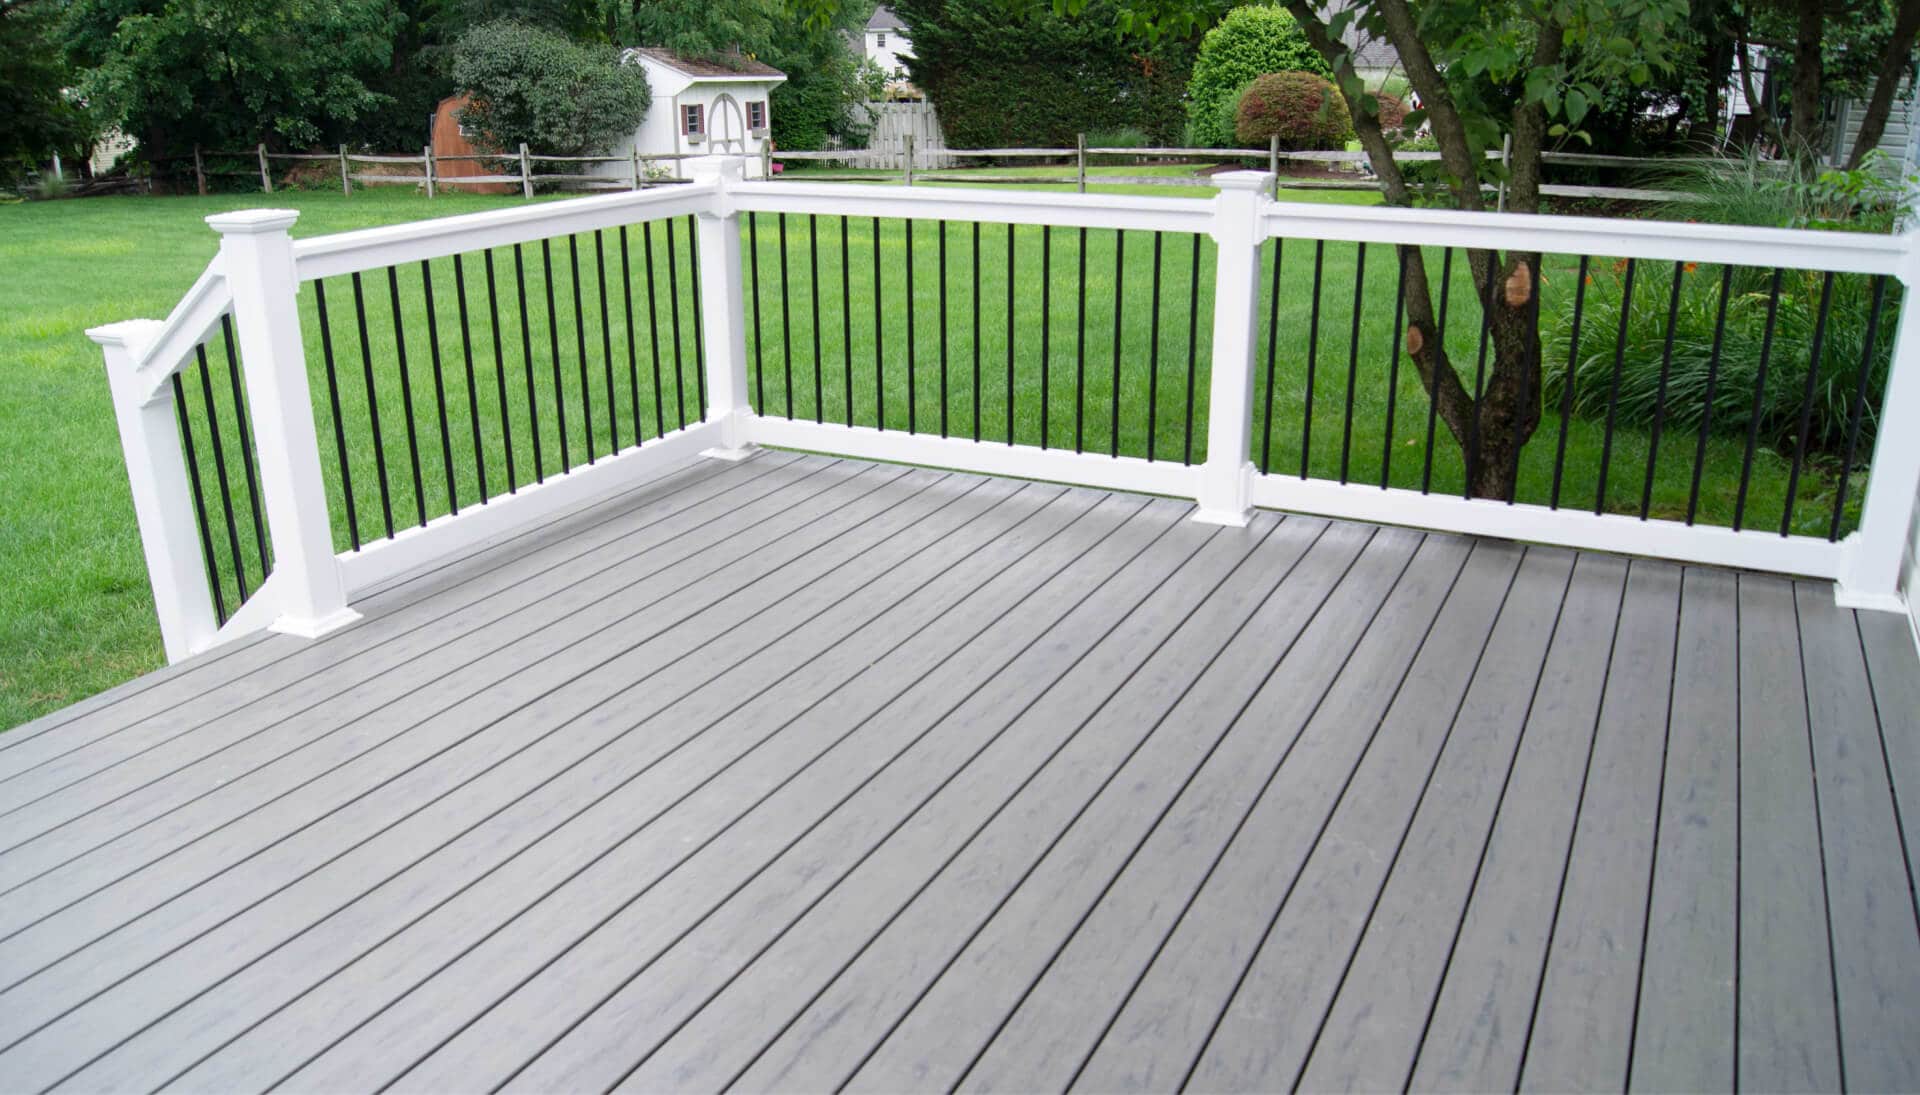 Deck Building Services in Spokane, WA: We Create Custom Railing and Covers for Your Deck